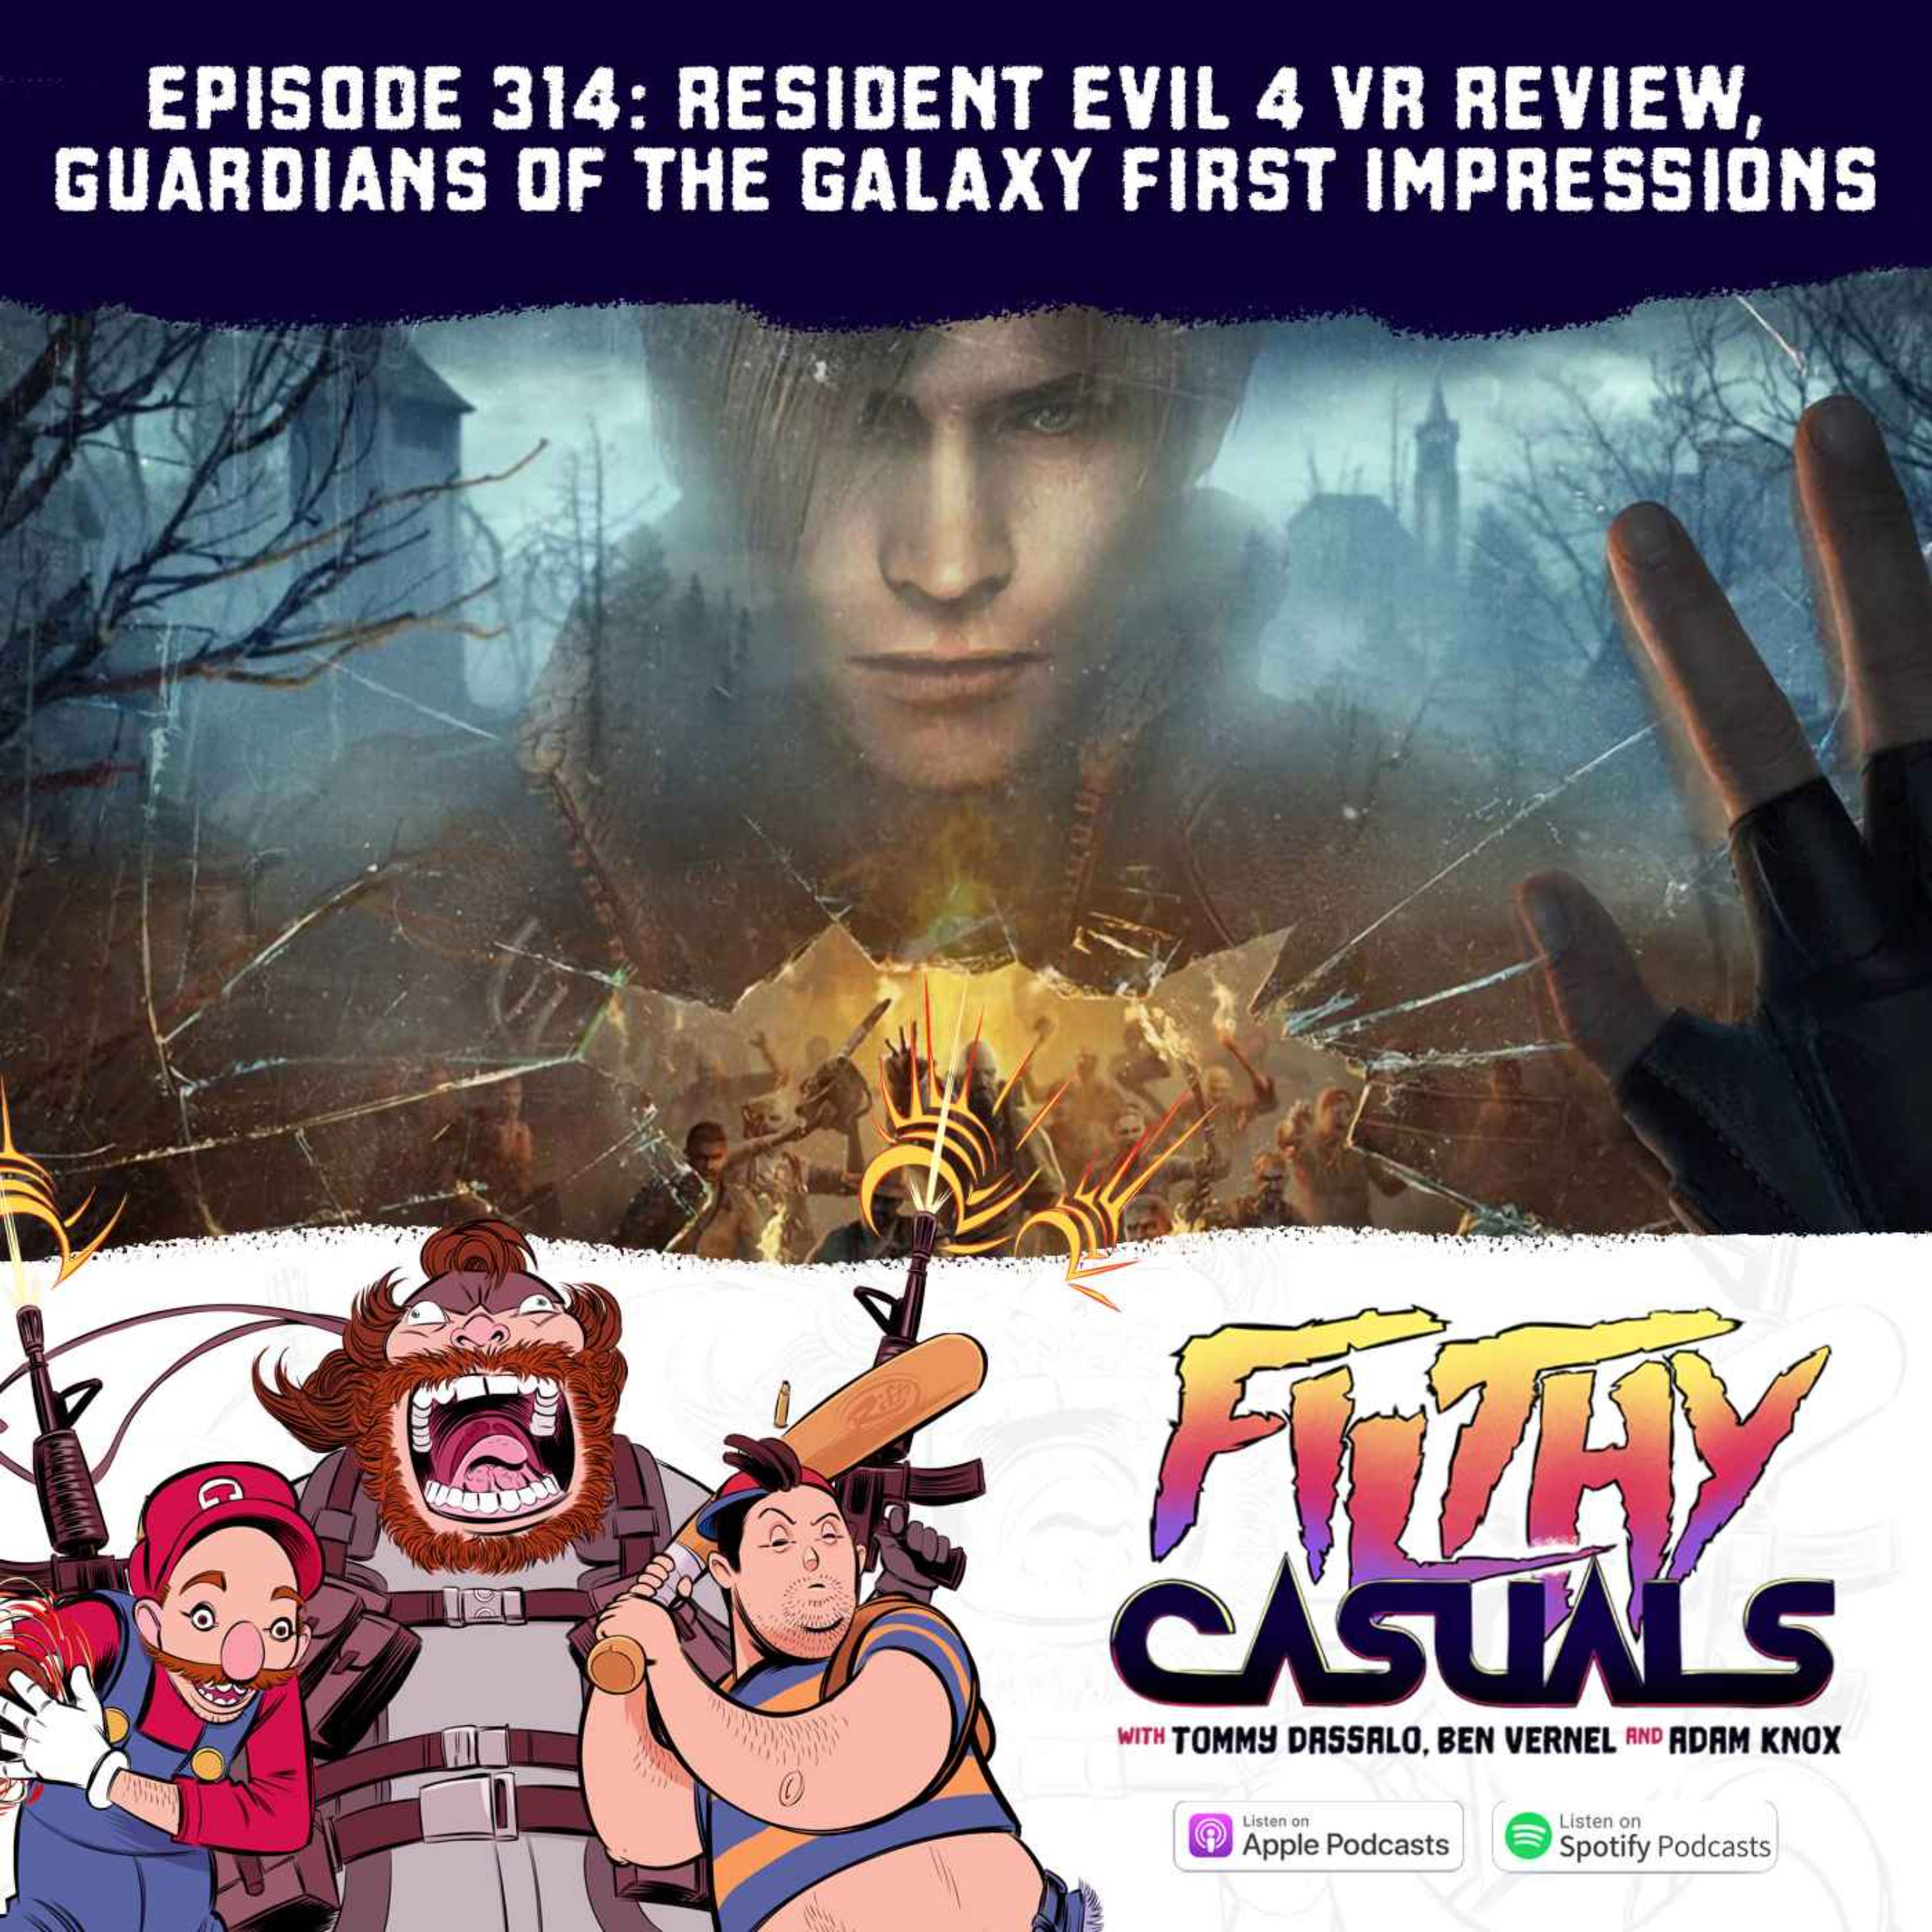 Episode 314: Resident Evil 4 VR Review, Guardians of the Galaxy First Impressions